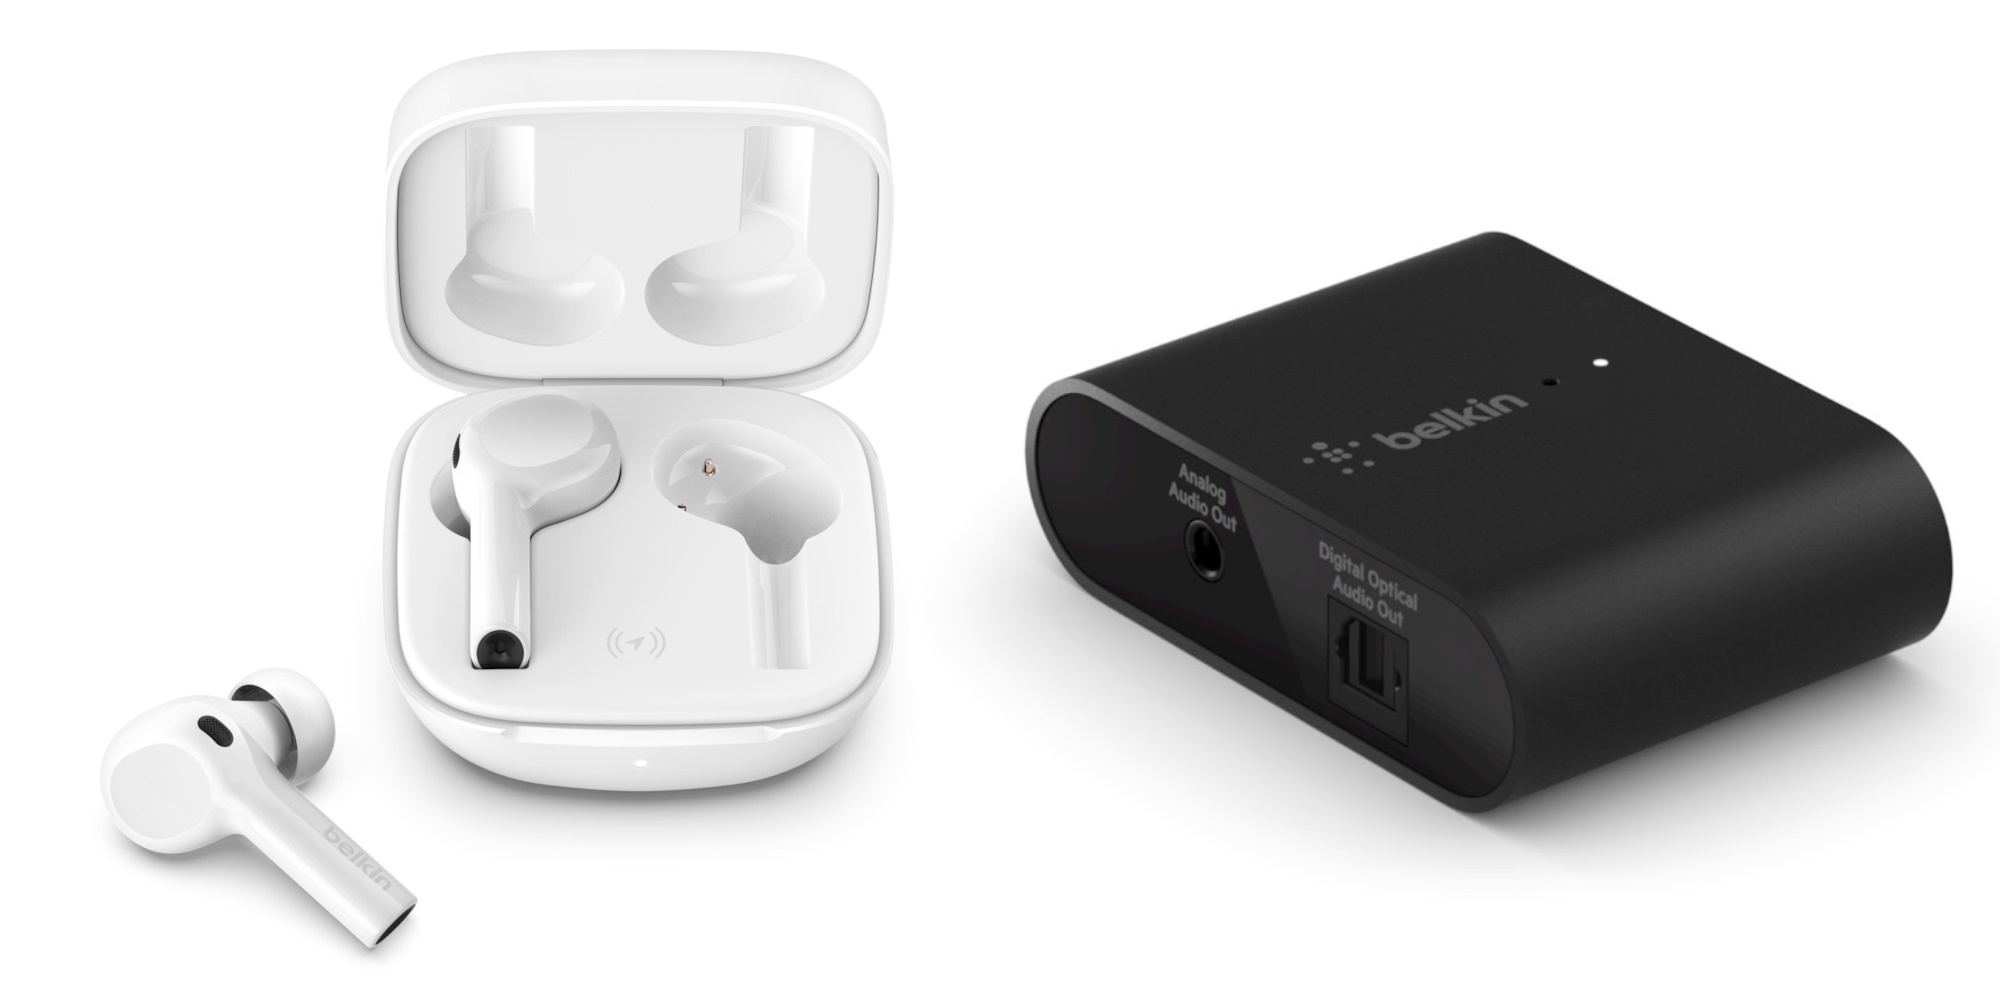 Belkin launches SOUNDFORM Connect Audio Adapter with Apple AirPlay